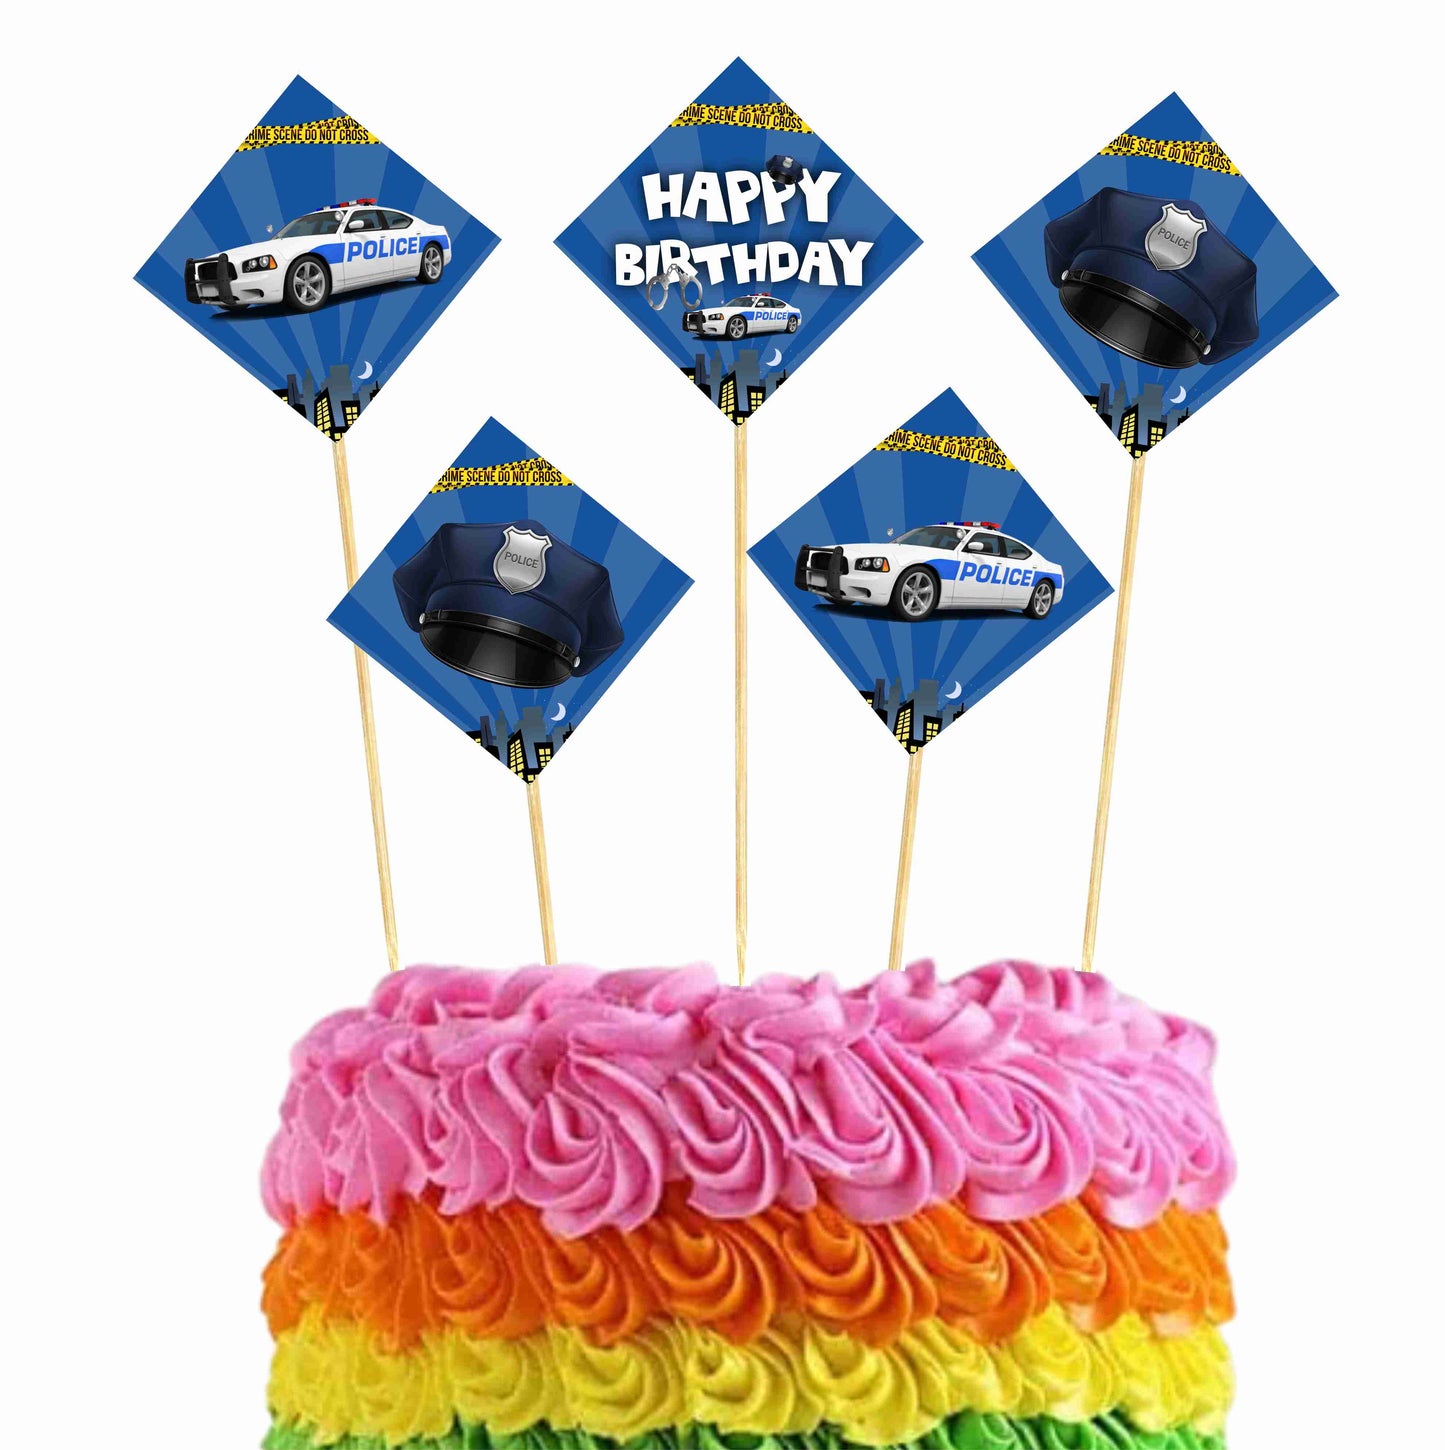 Police Theme Cake Topper Pack of 10 Nos for Birthday Cake Decoration Theme Party Item For Boys Girls Adults Birthday Theme Decor